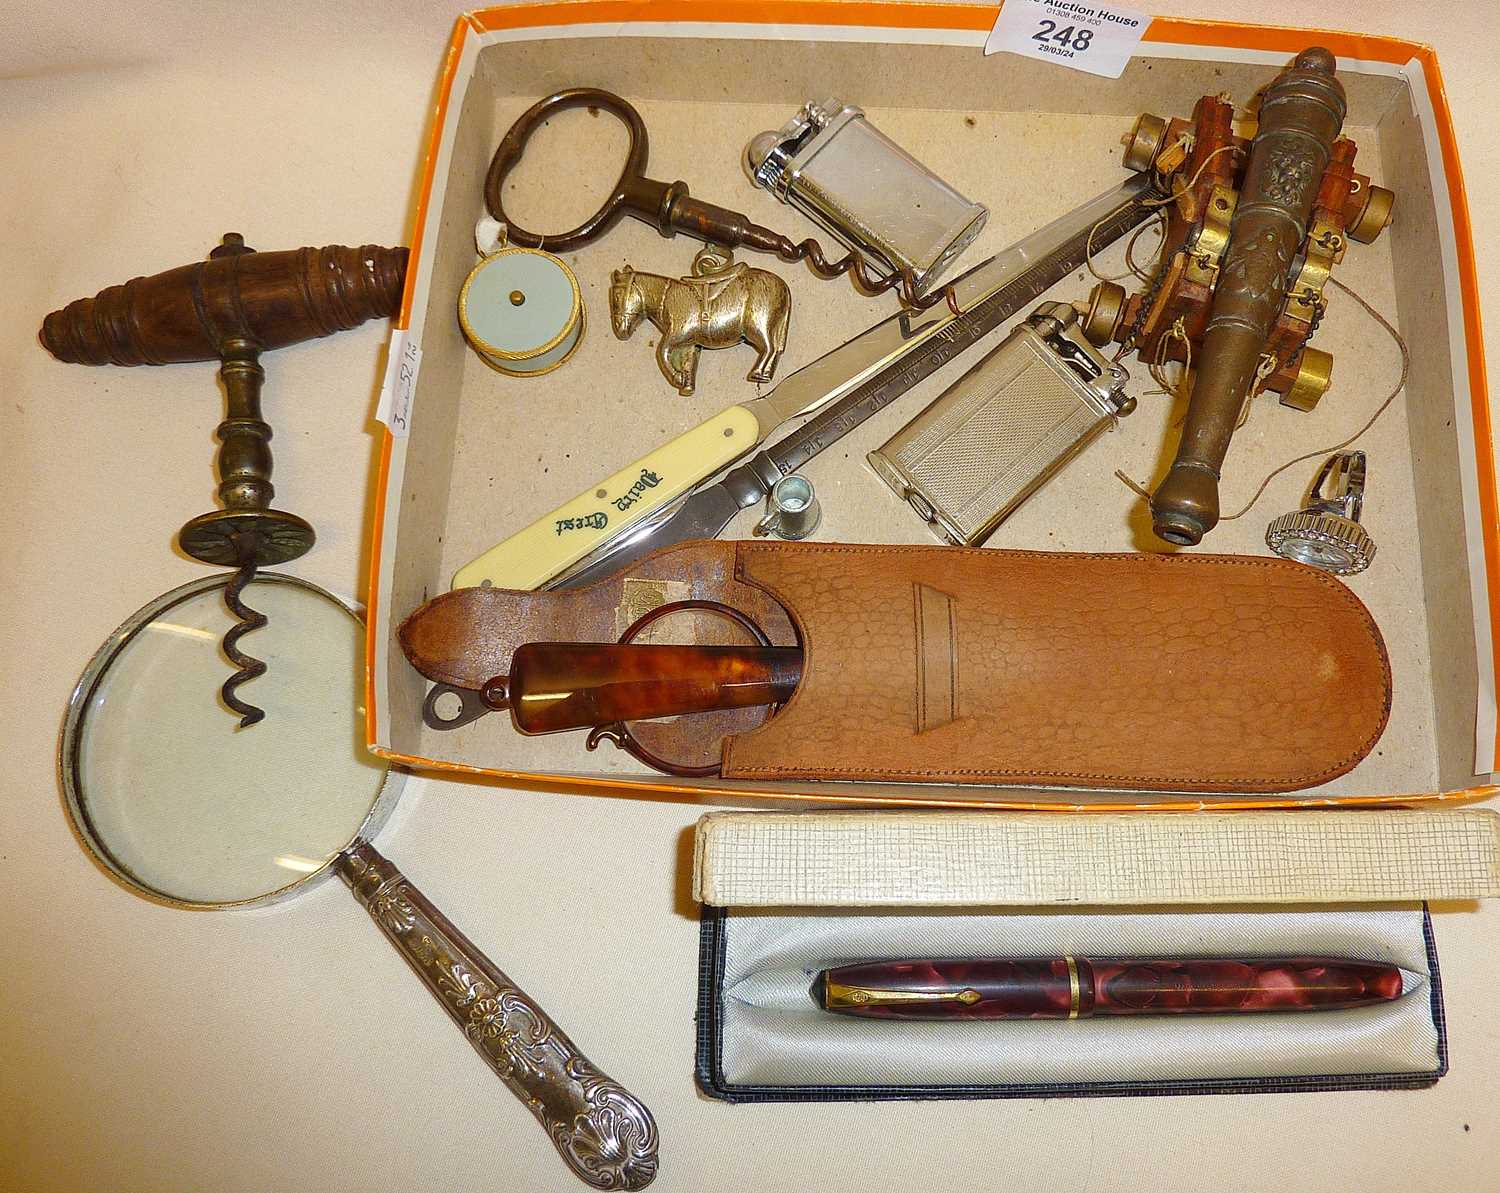 Lorgnettes, antique corkscrew with Henshall button, cannon model, silver handled magnifying glass,